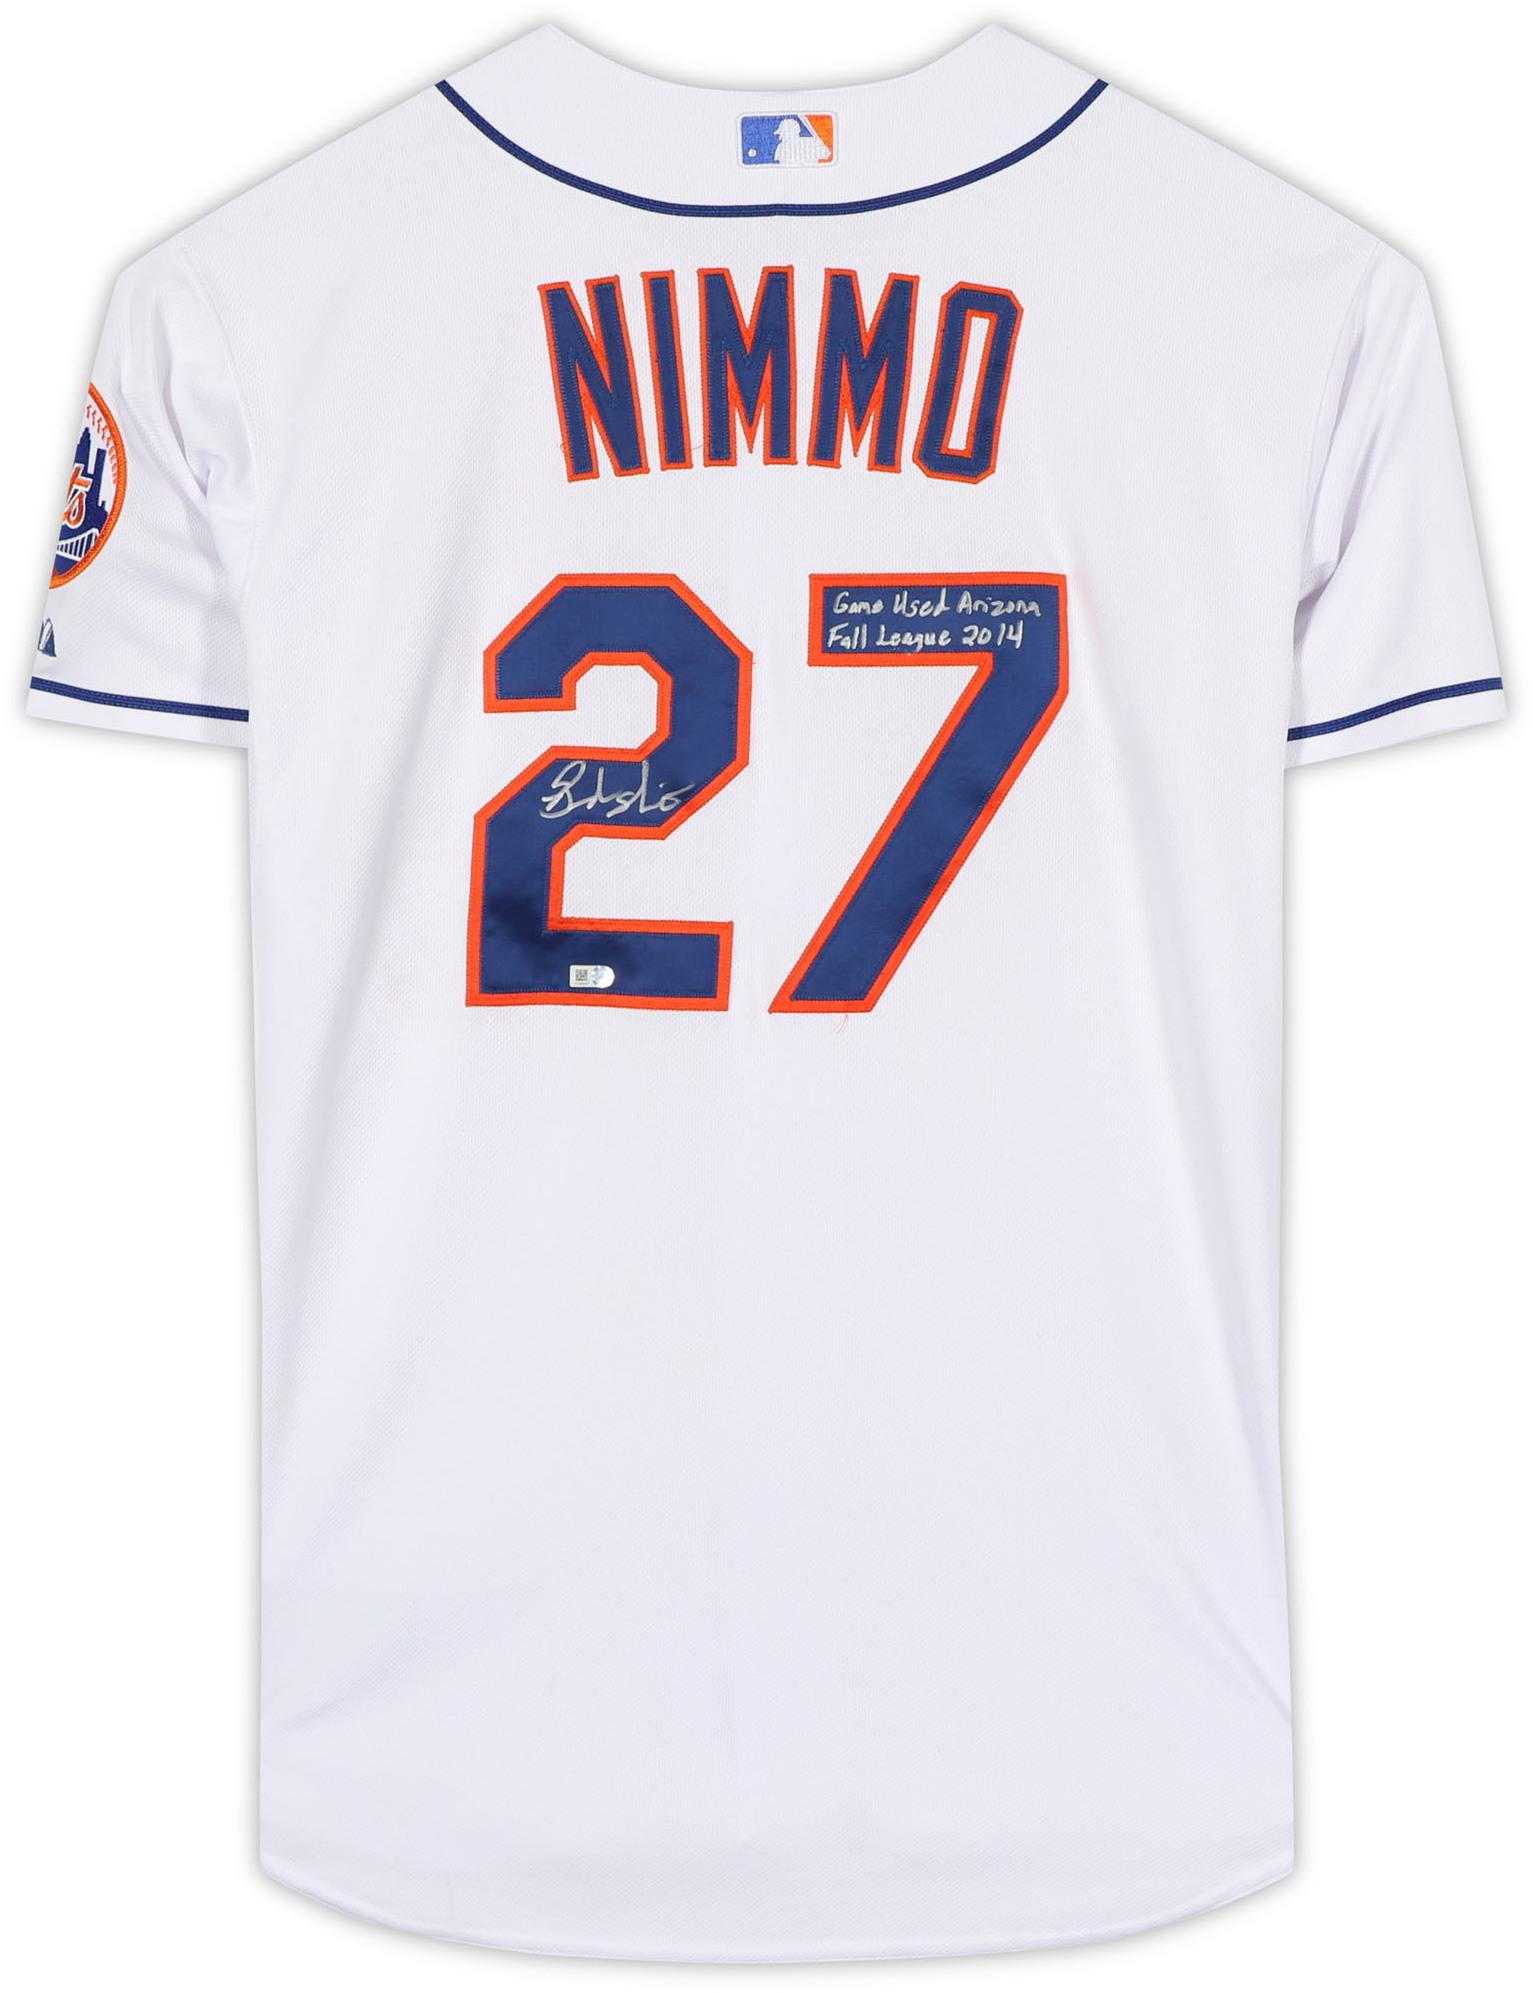 mets white jersey